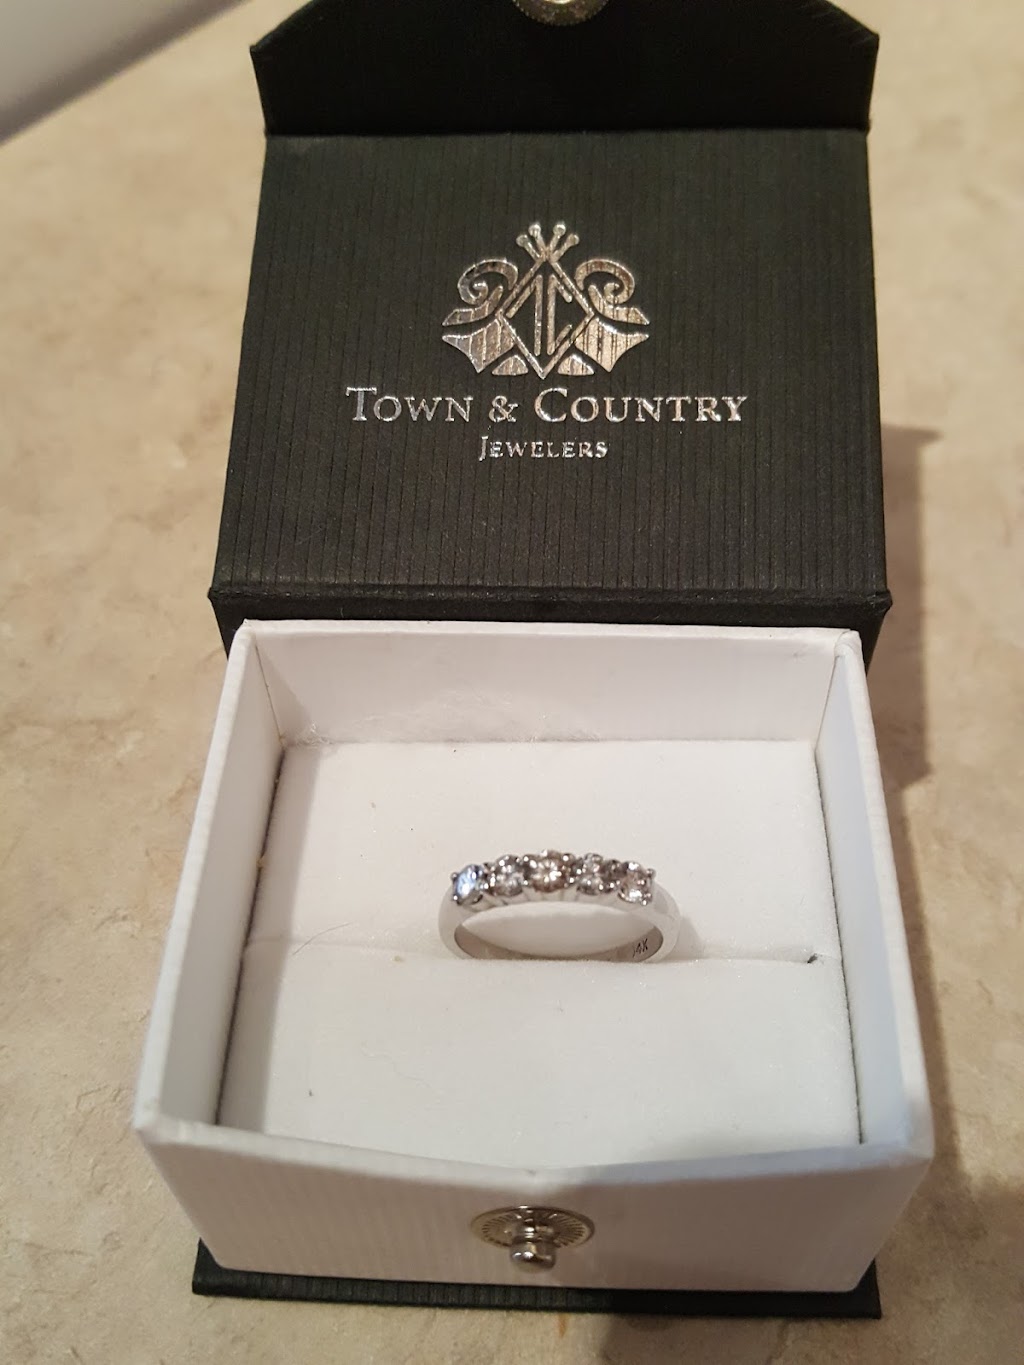 Town & Country Jewelers | 204 Monmouth Rd, Oakhurst, NJ 07755 | Phone: (732) 542-0456